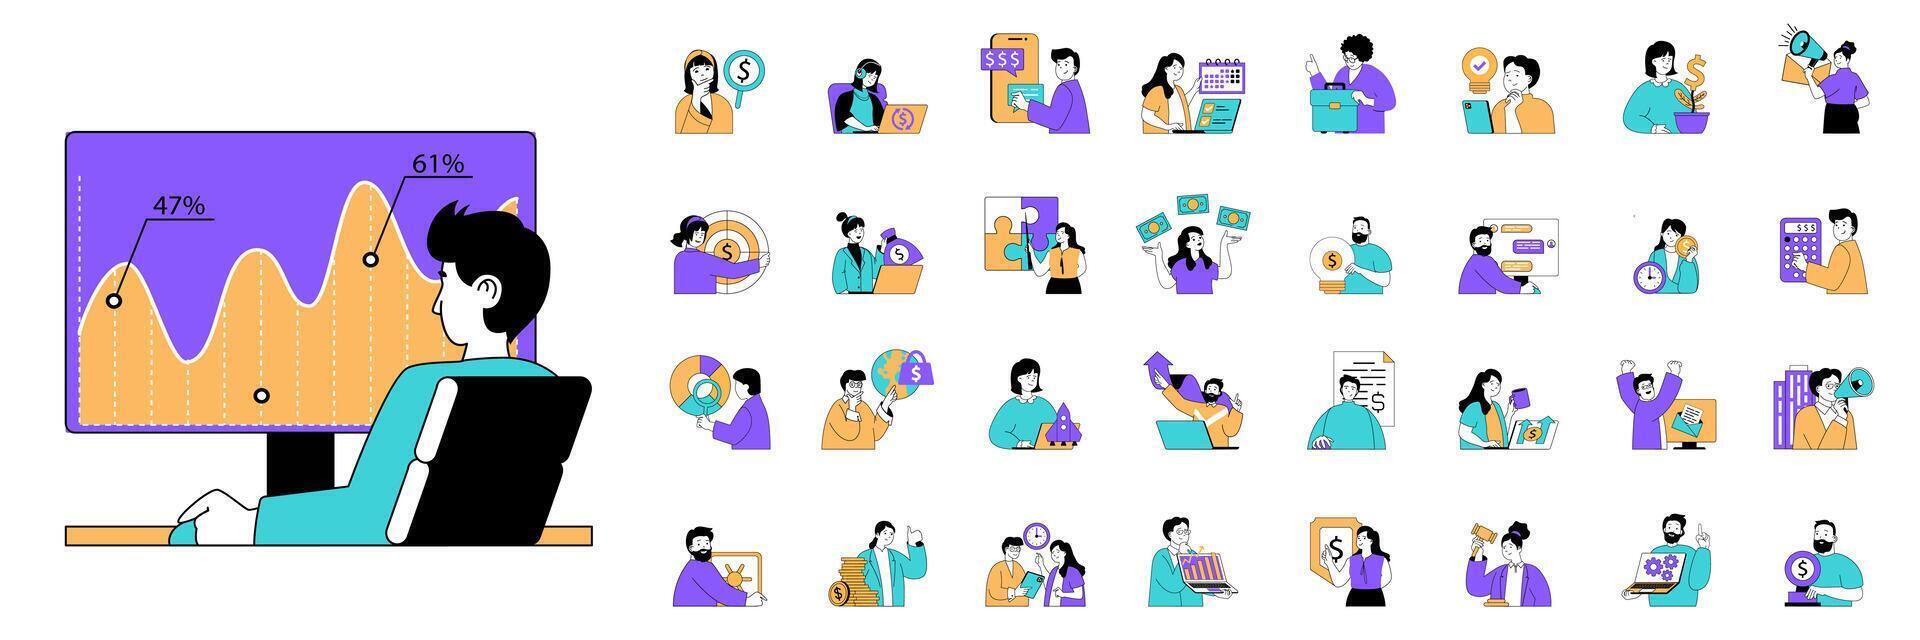 Business concept with character situations mega set in flat web design. Bundle of scenes people brainstorming, invecting, calculating earning money, developing company project. Vector illustrations.